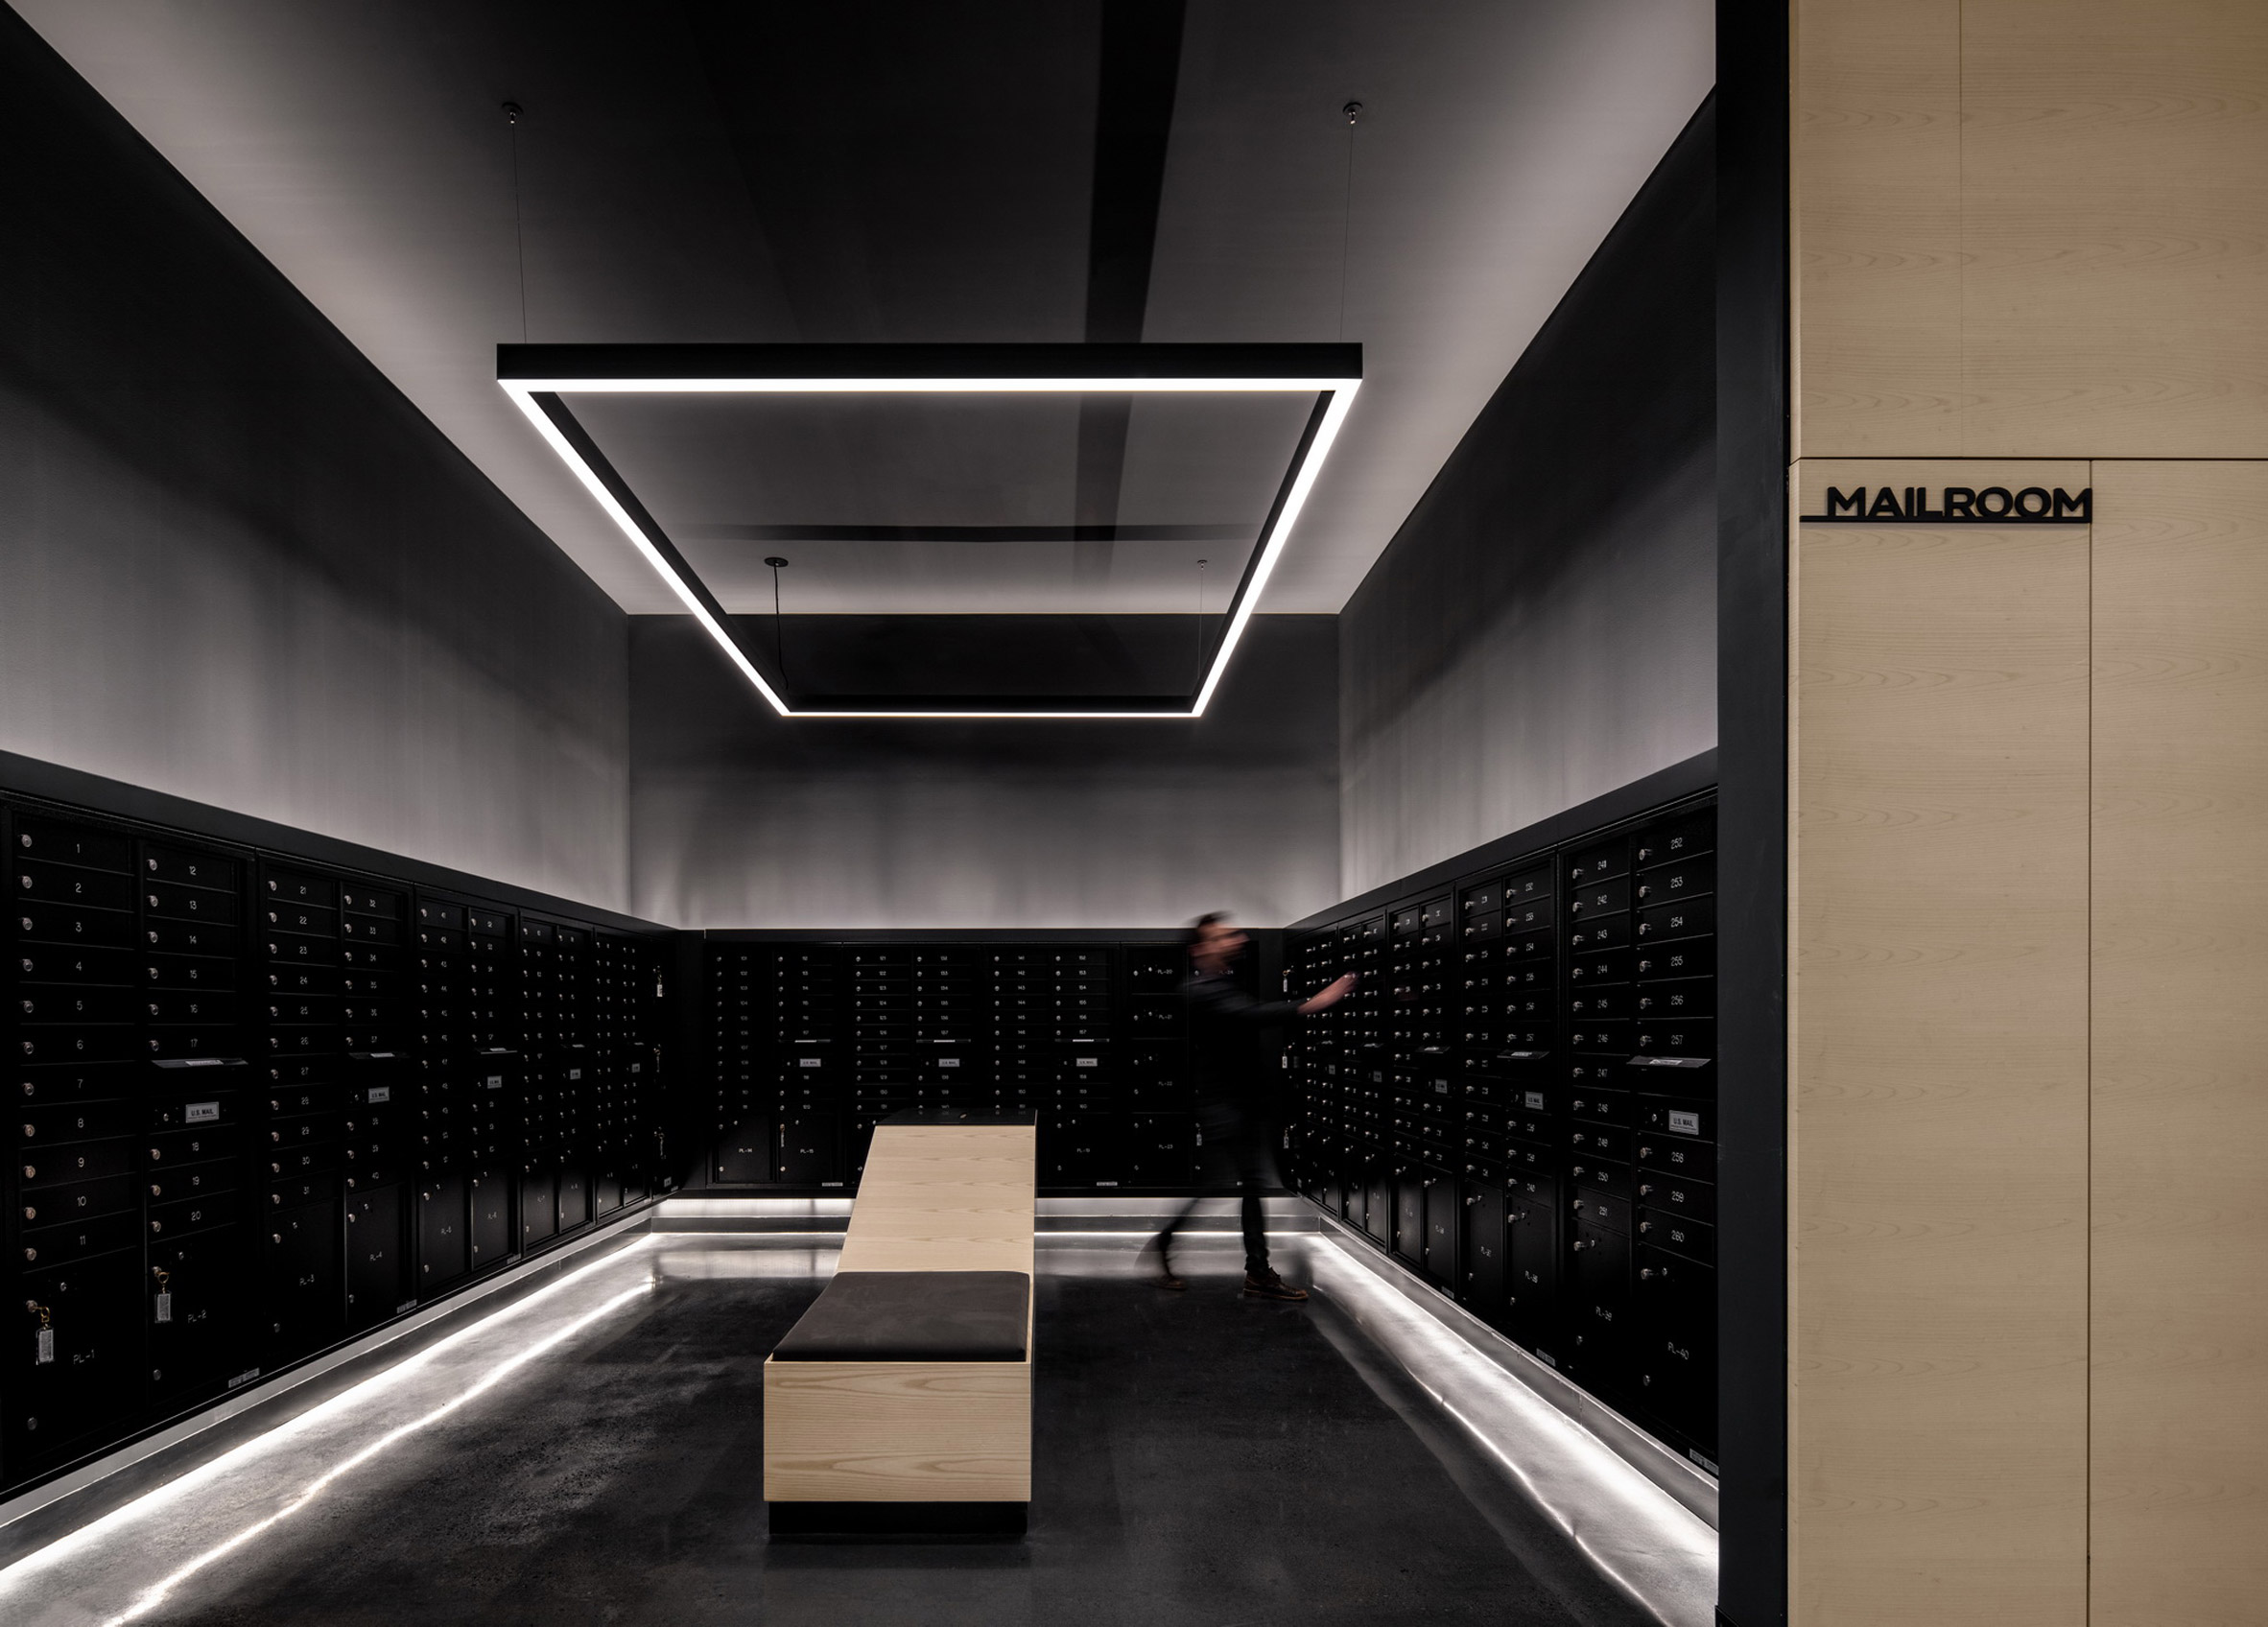 Black and silver mailroom within mixed-use building by Handel Architects with rectilinear LED lighting overhead